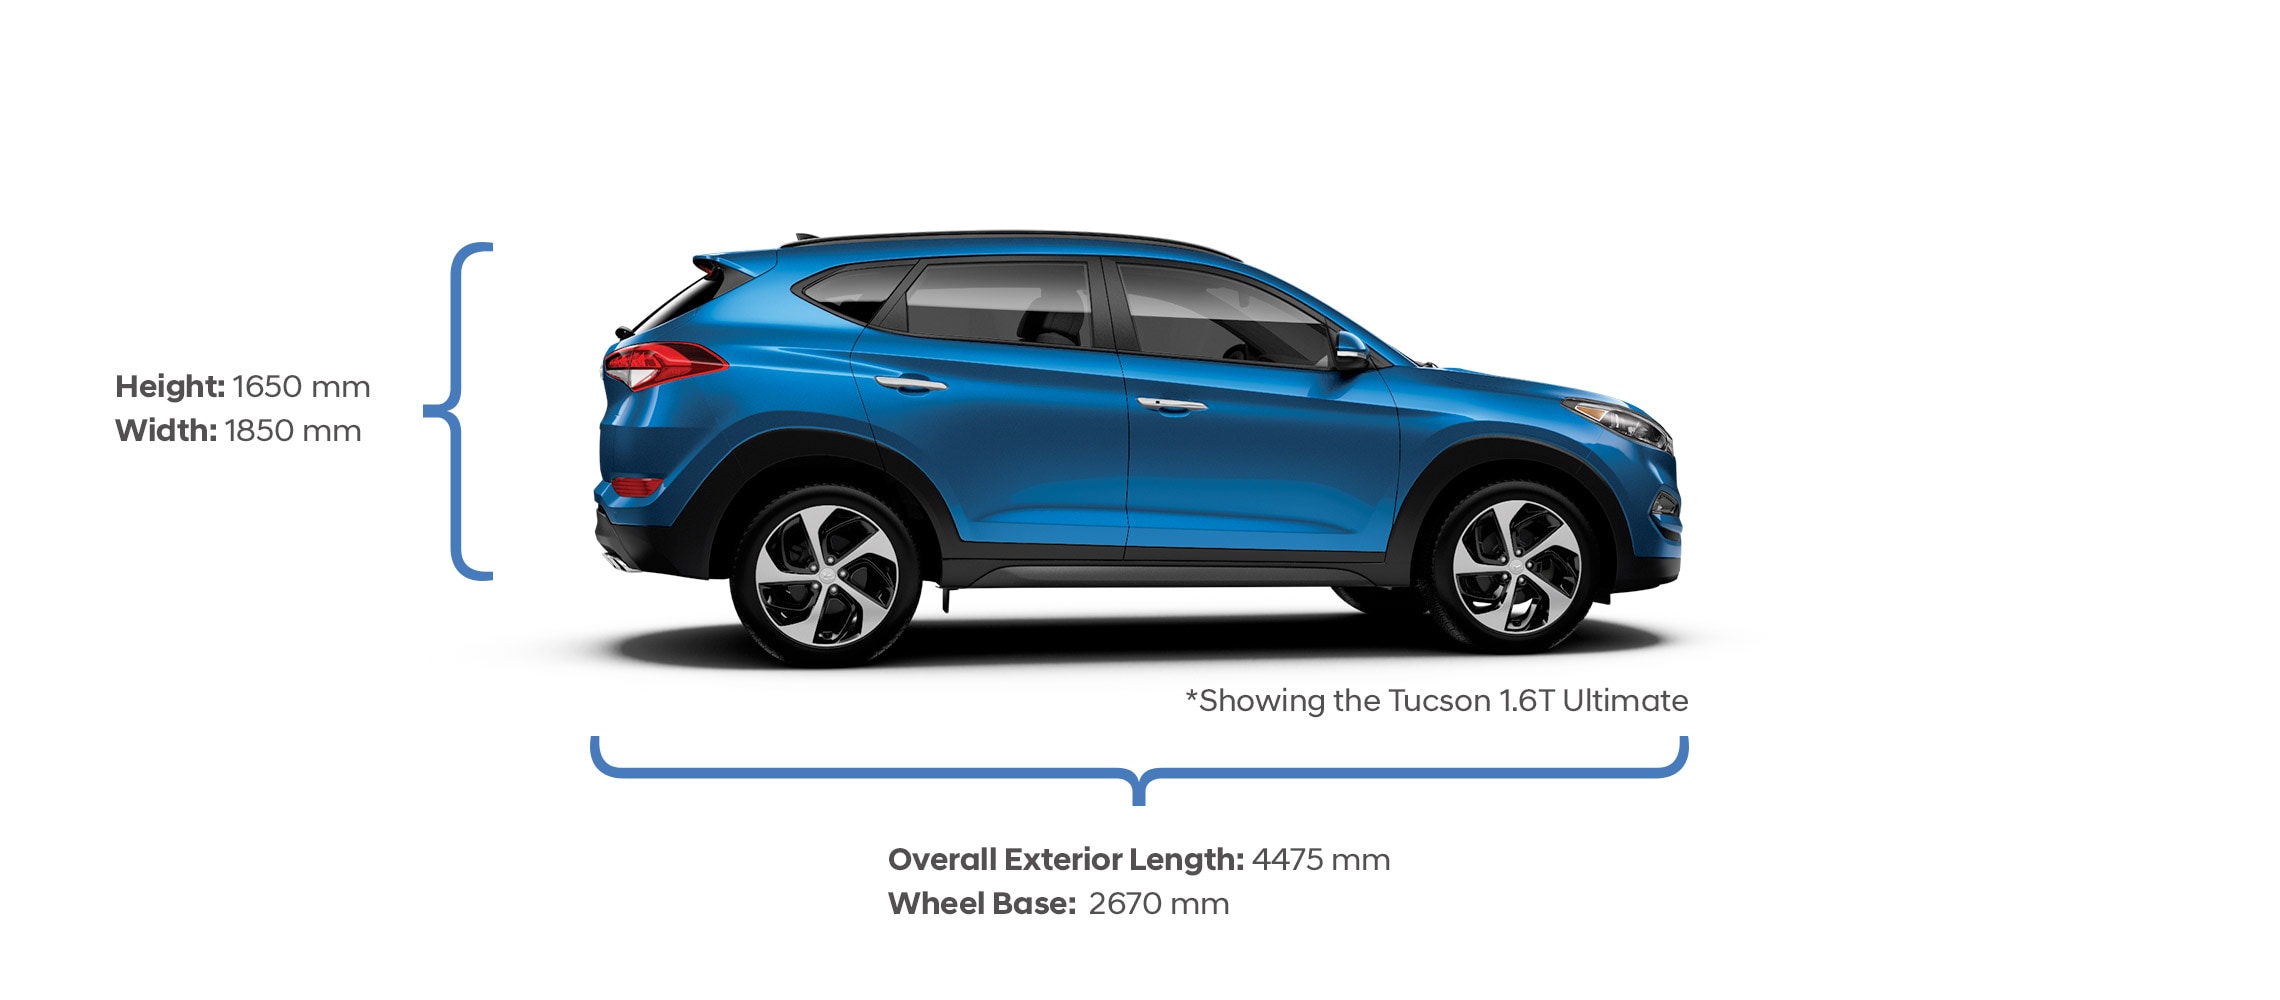 Hyundai Tucson Specifications - Dimensions, Configurations